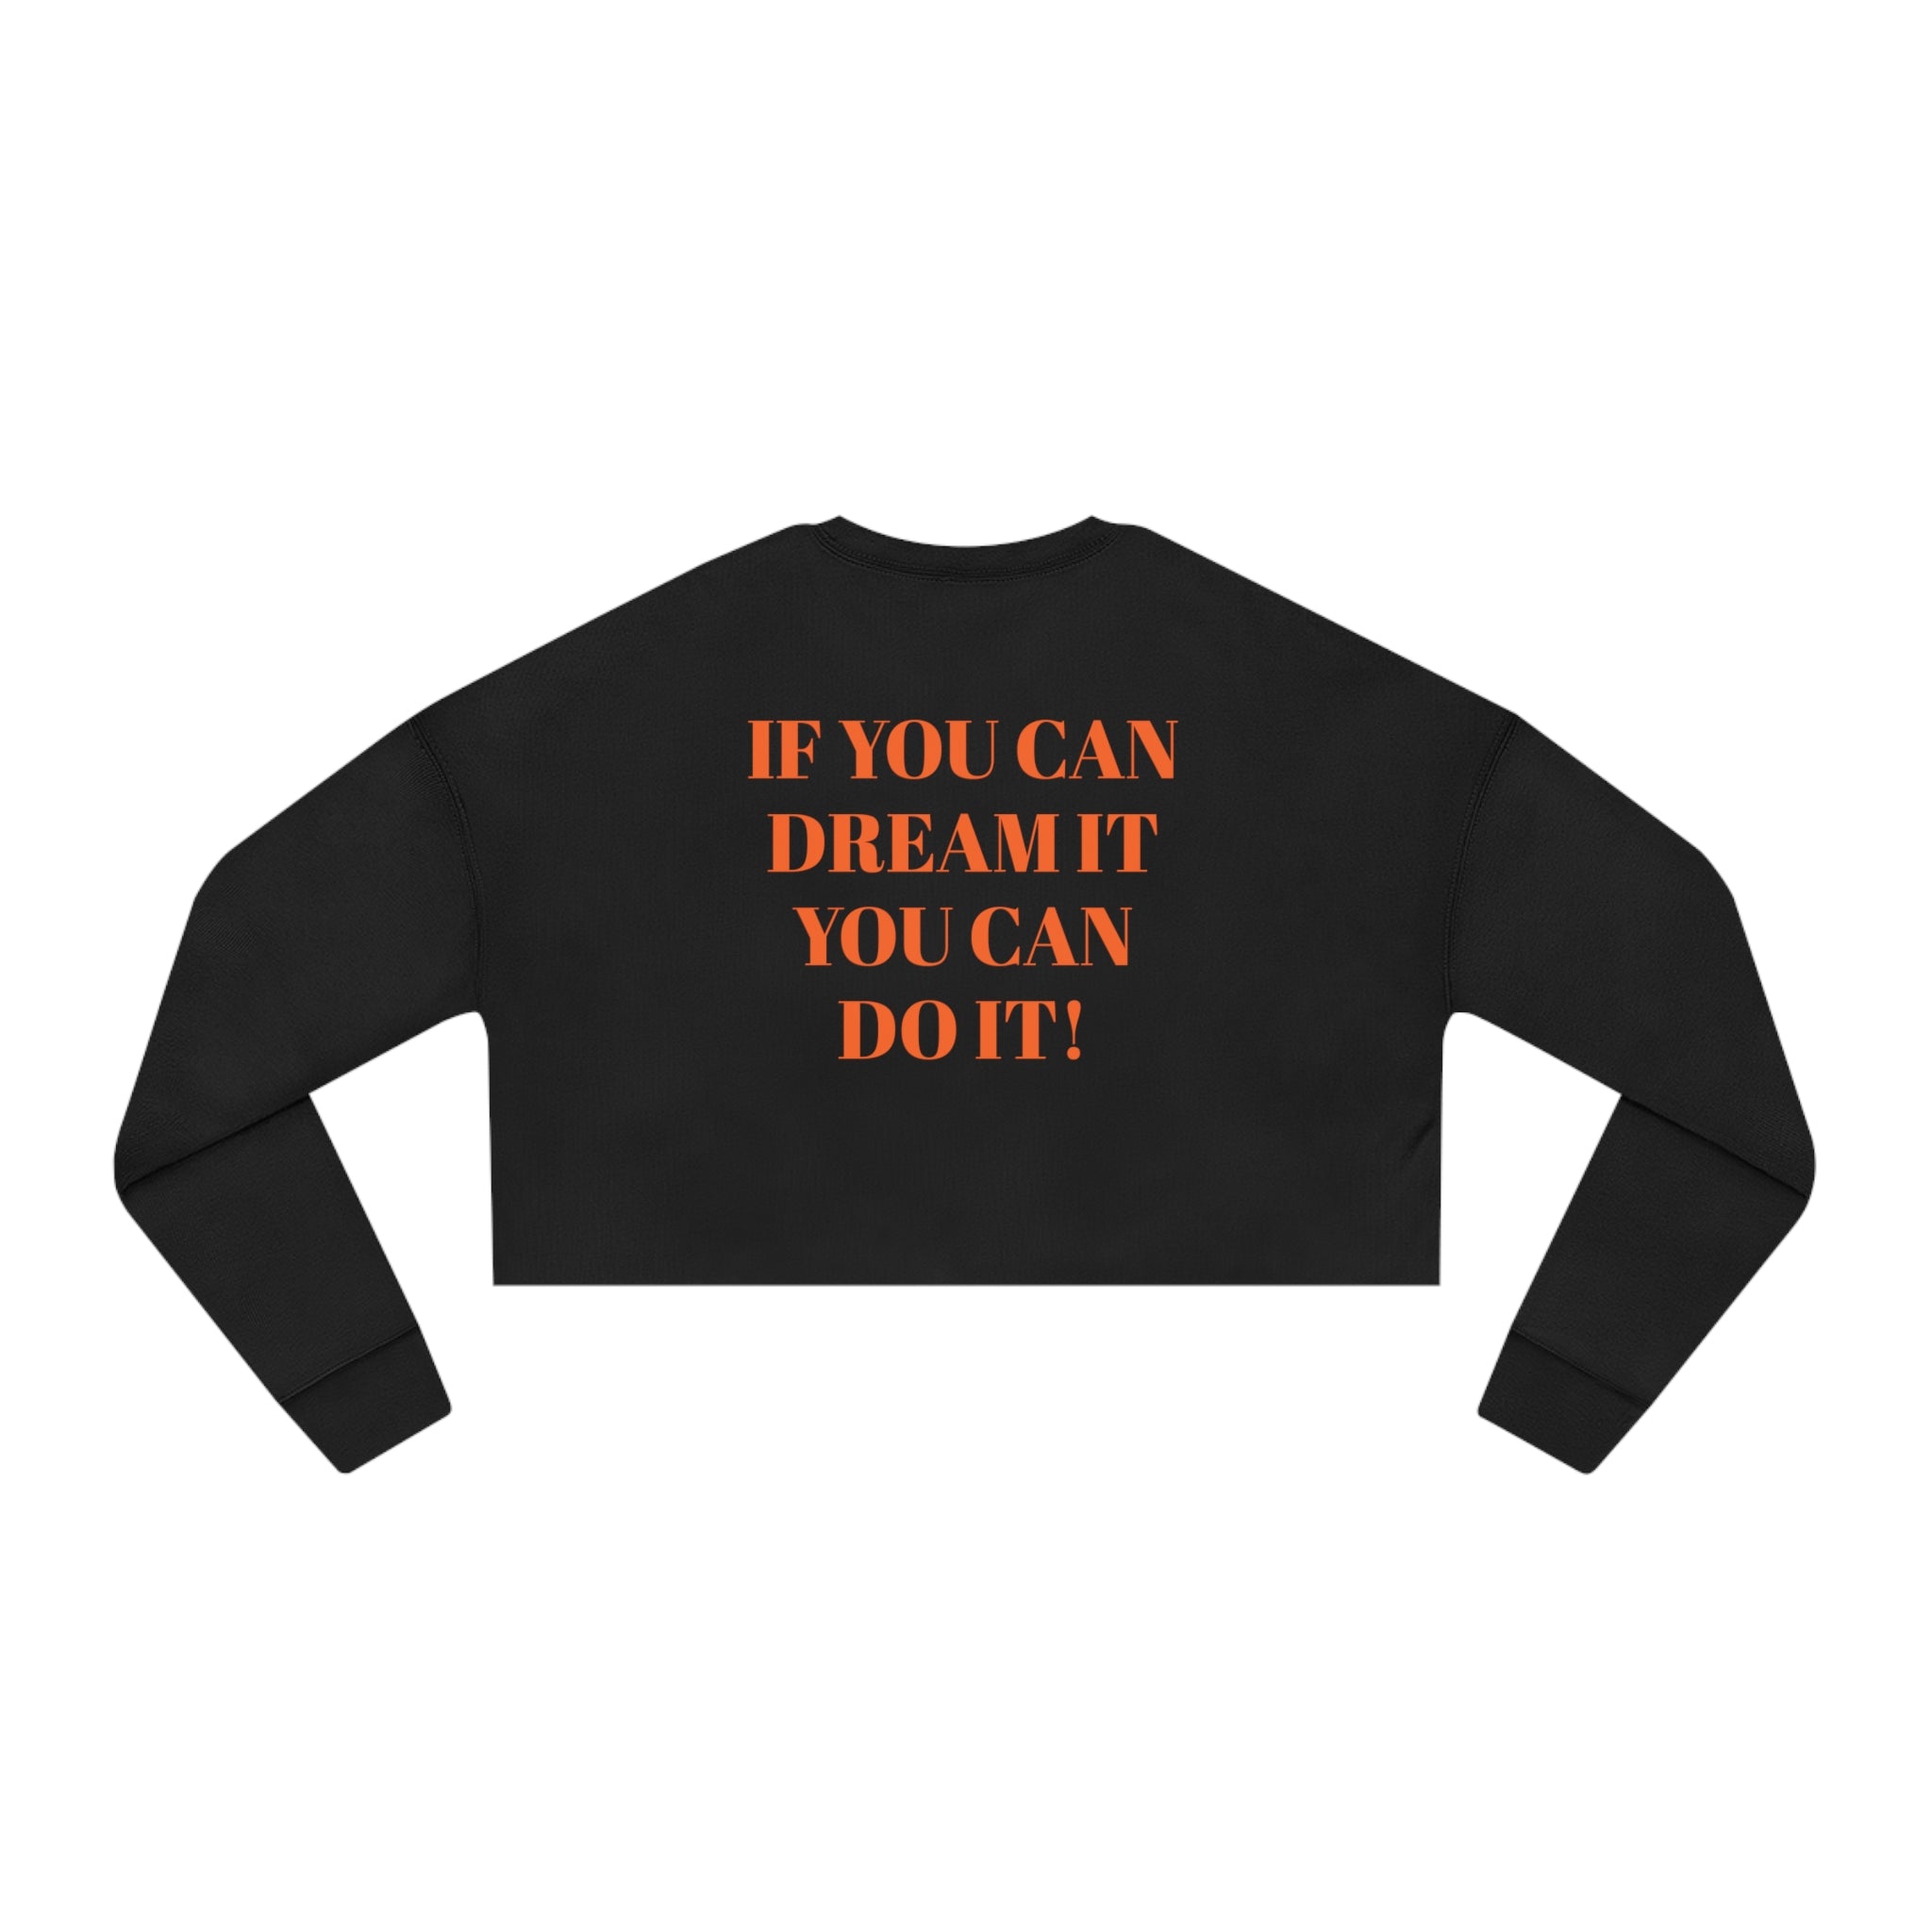 IF YOU CAN DREAM IT YOU CAN DO IT Cropped Sweatshirt